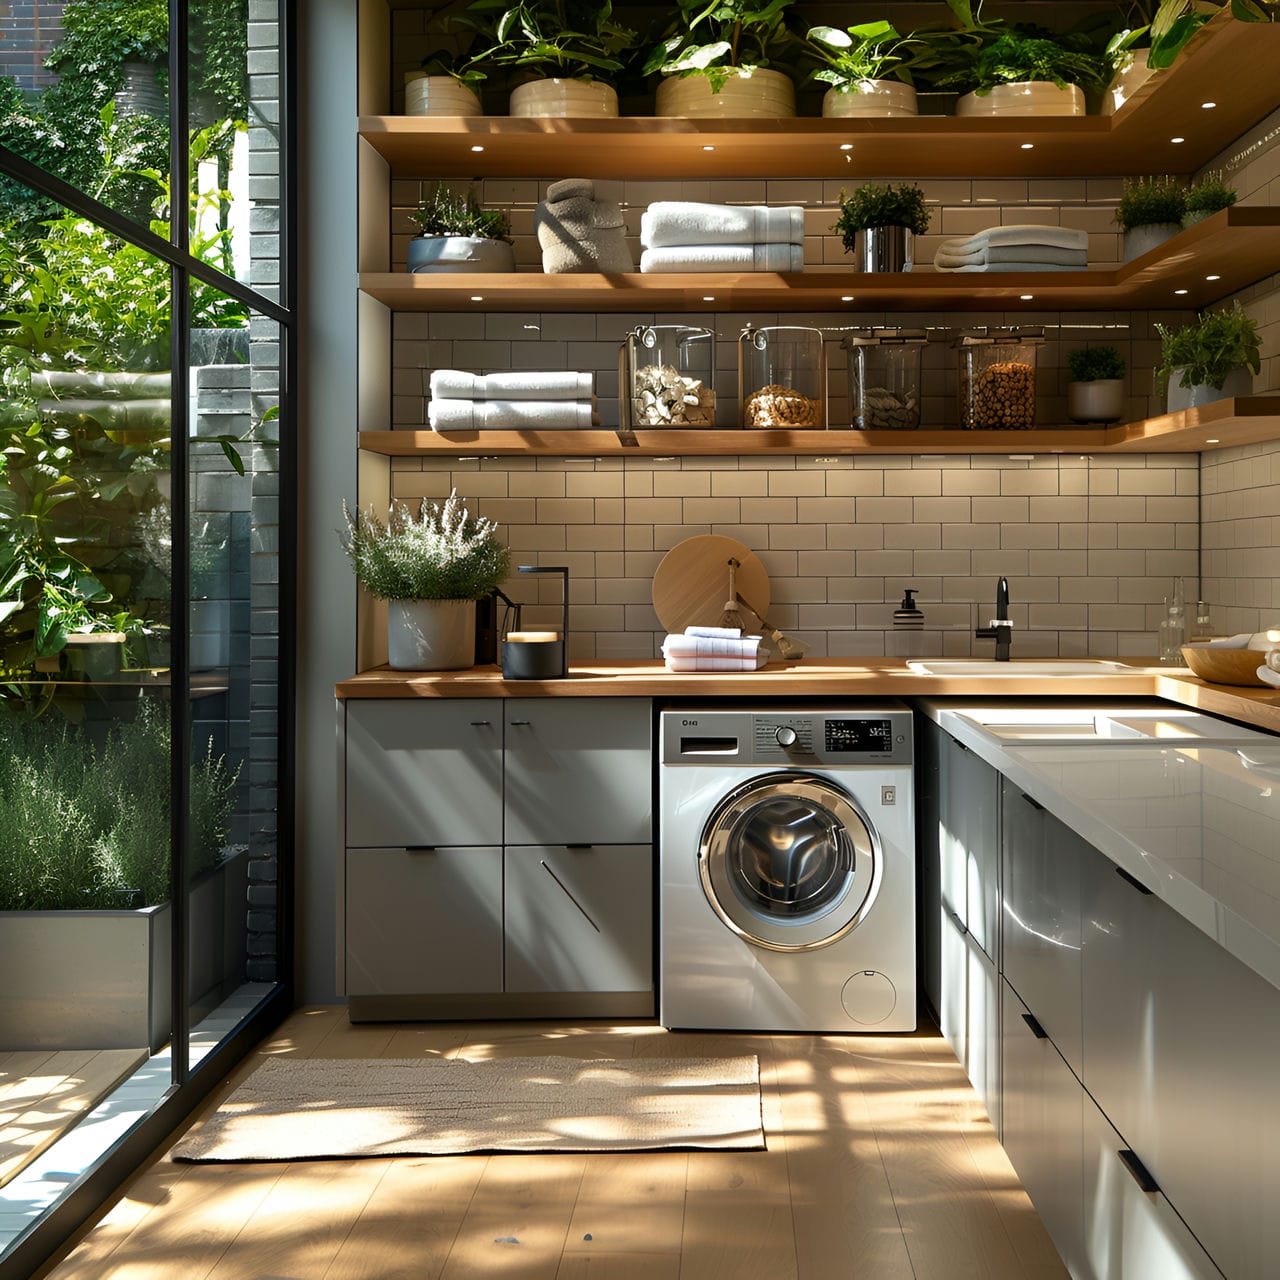 Utility room: size, functionality, uses, furniture and renovation